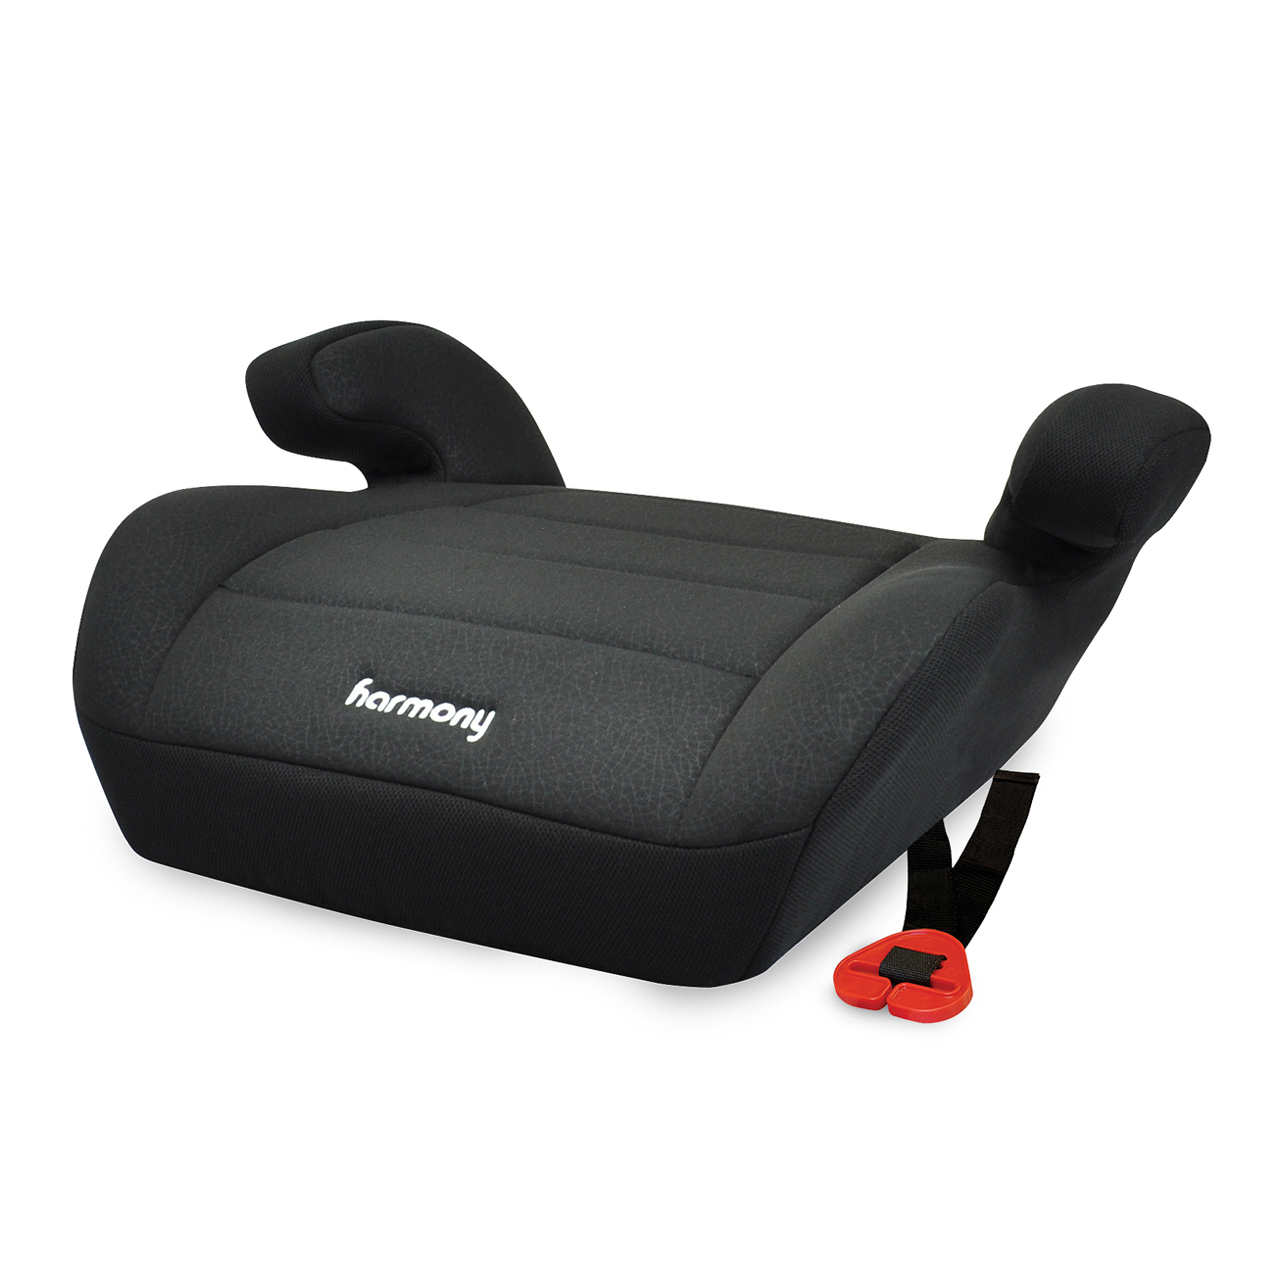 Harmony Juvenile Youth Backless Booster Car Seat, Black - image 1 of 7